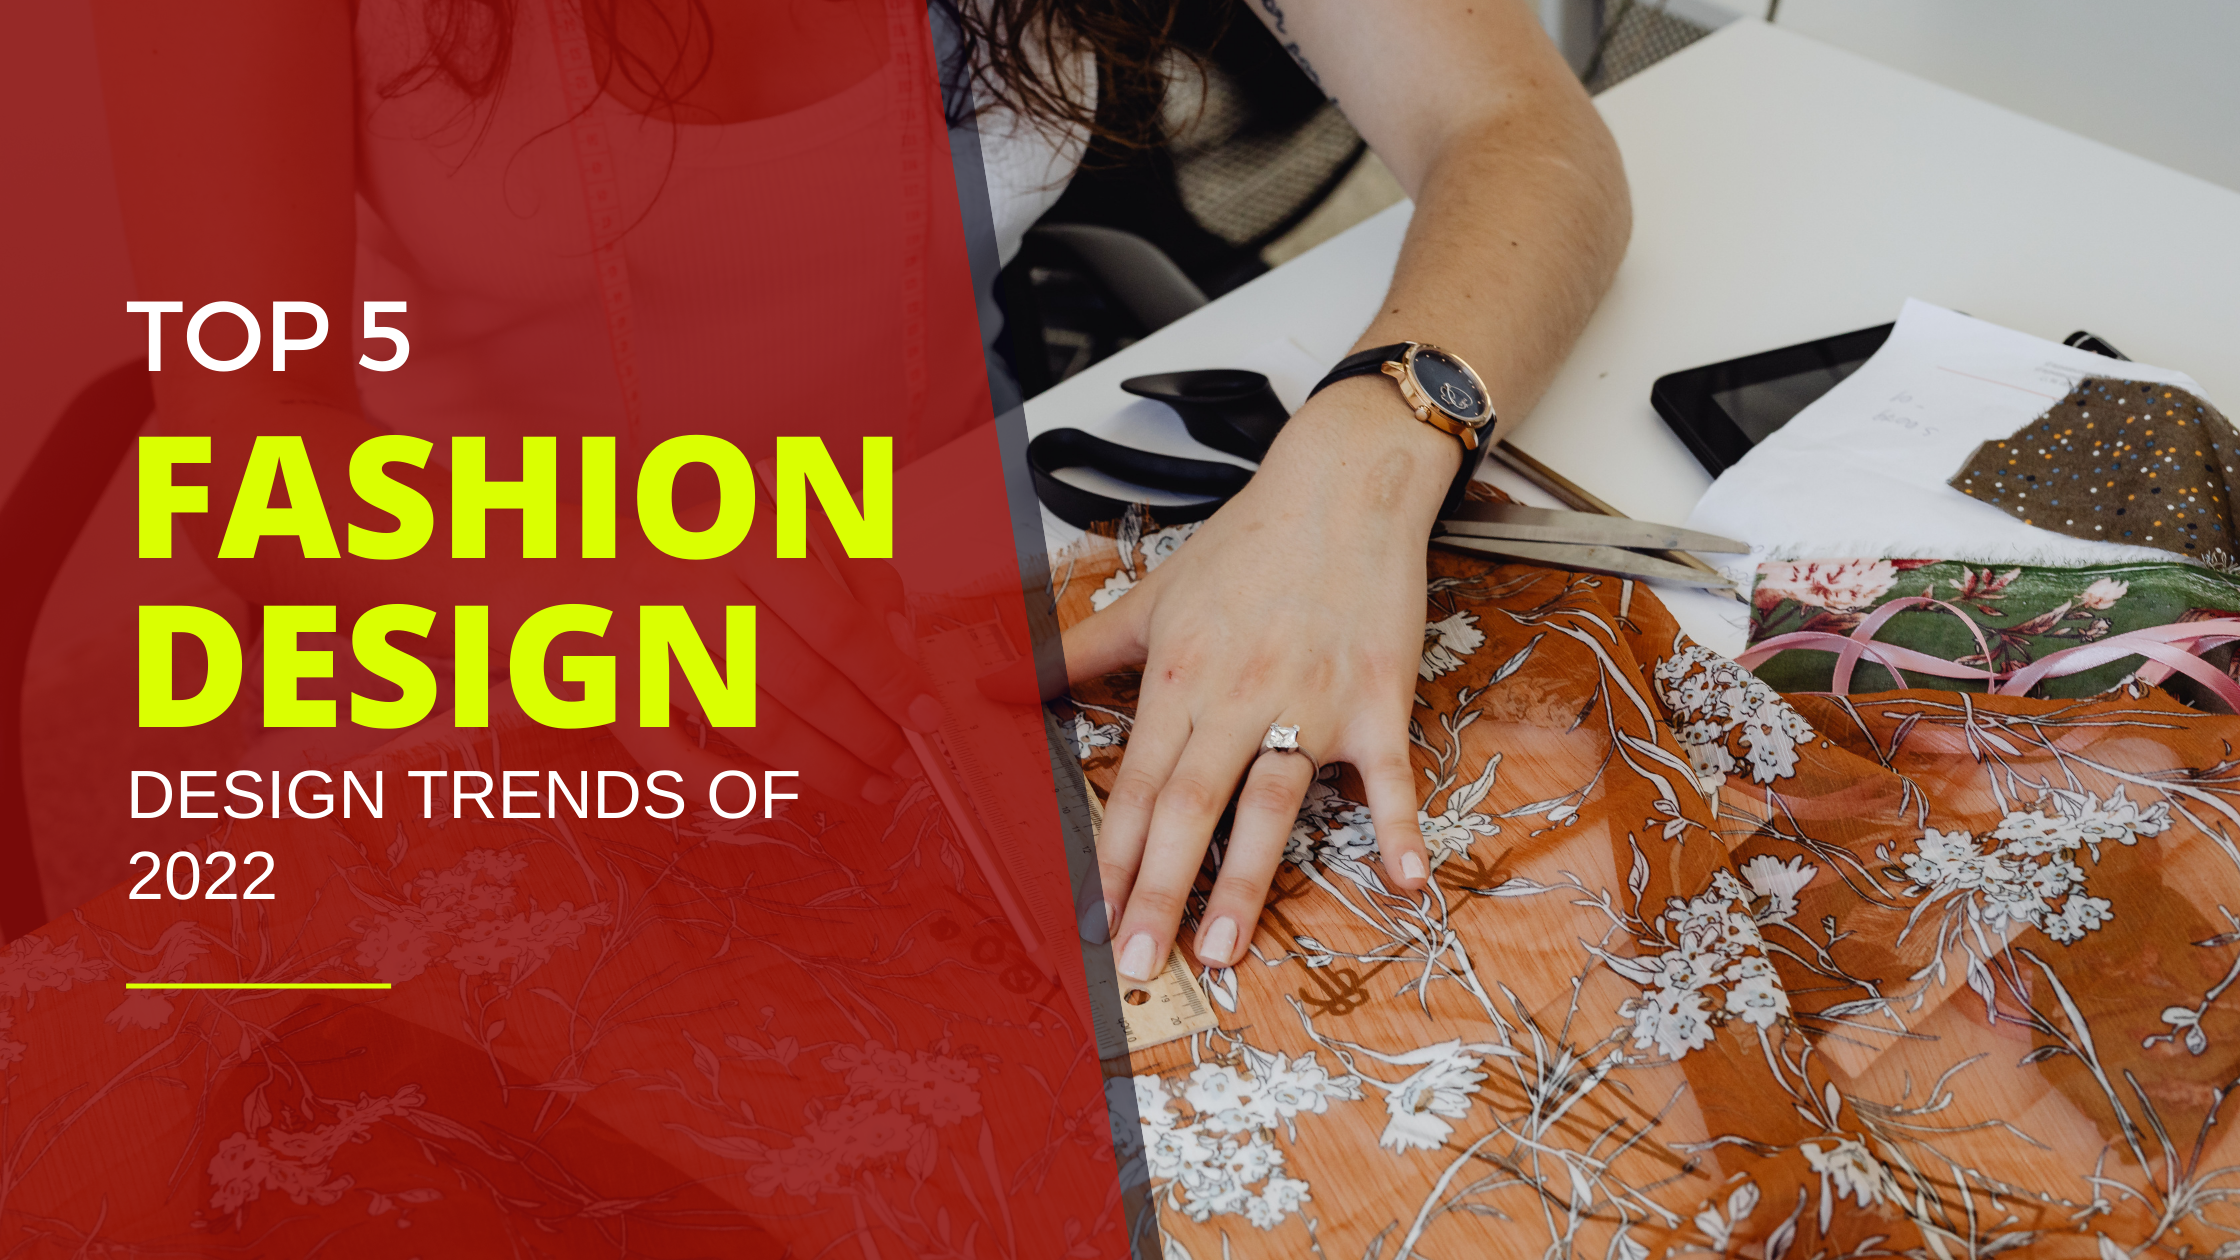 Top 5 fashion design trends of 2022